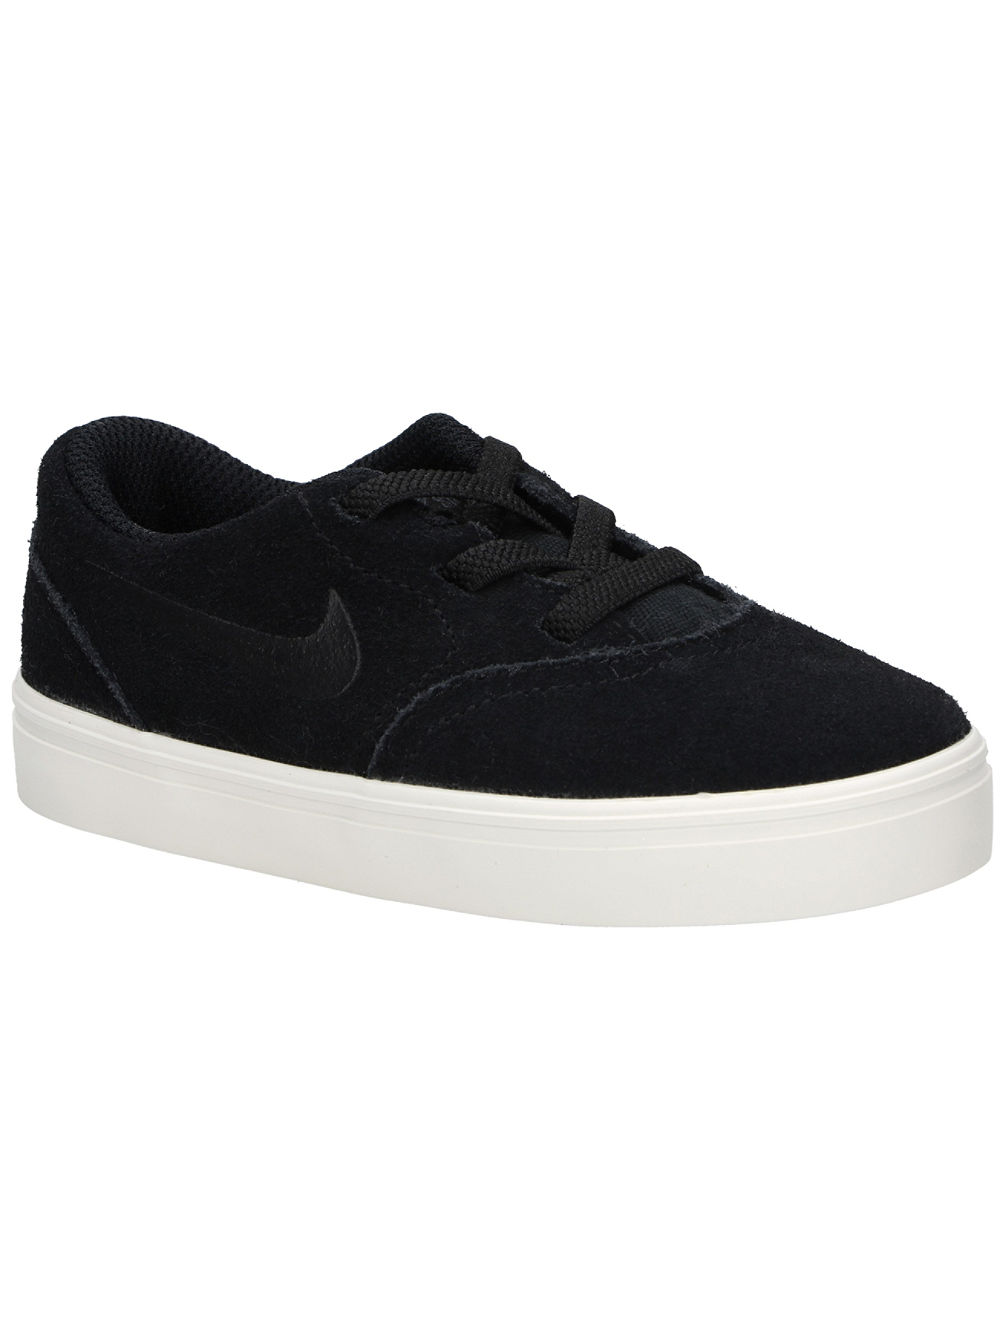 SB Check Suede TD Skate Chaussures Baby